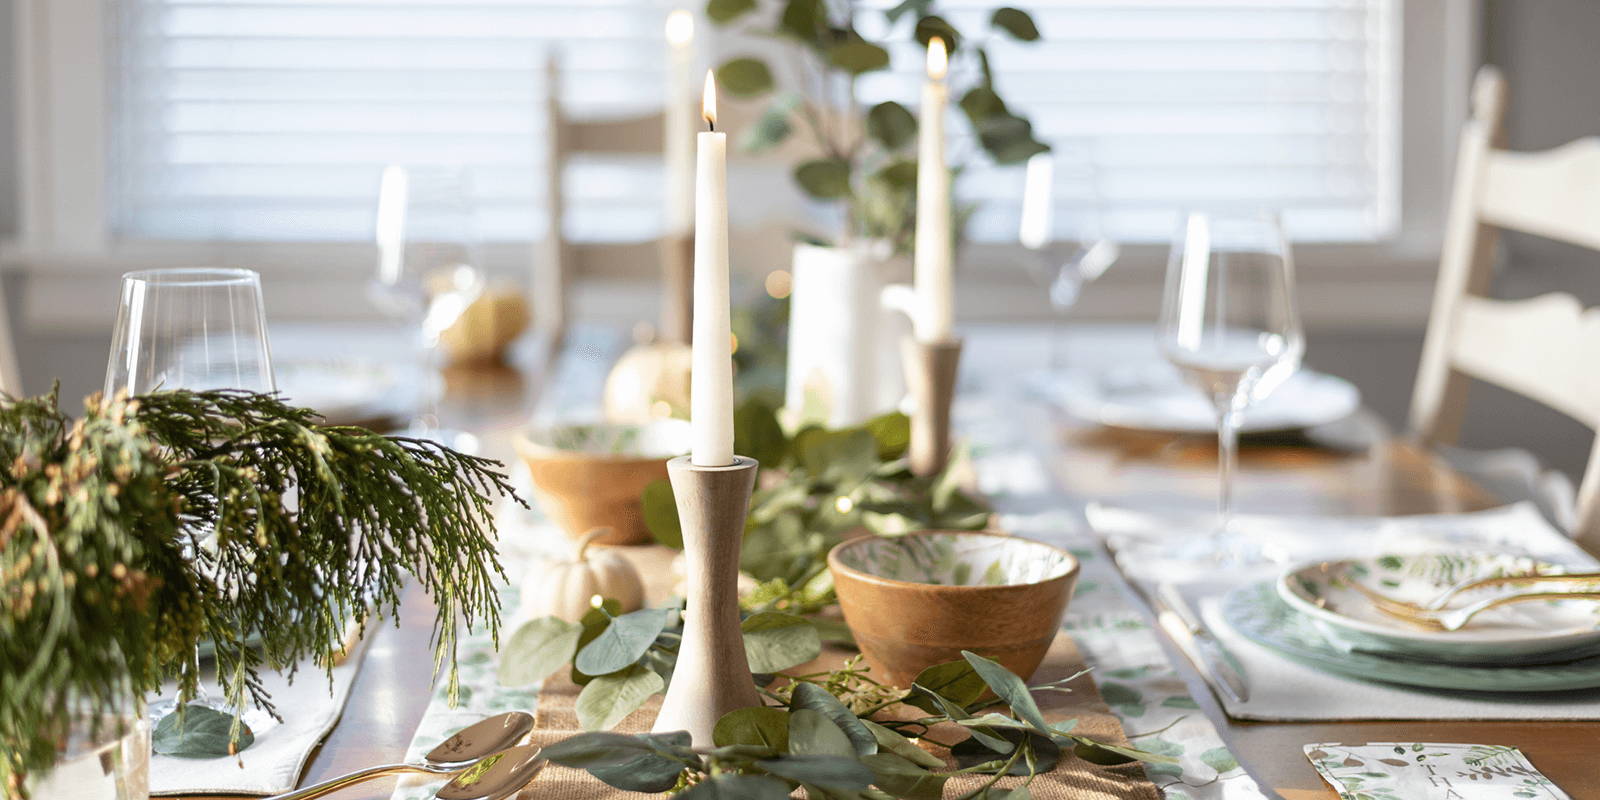 Table set with greenery, candles, and dishware.